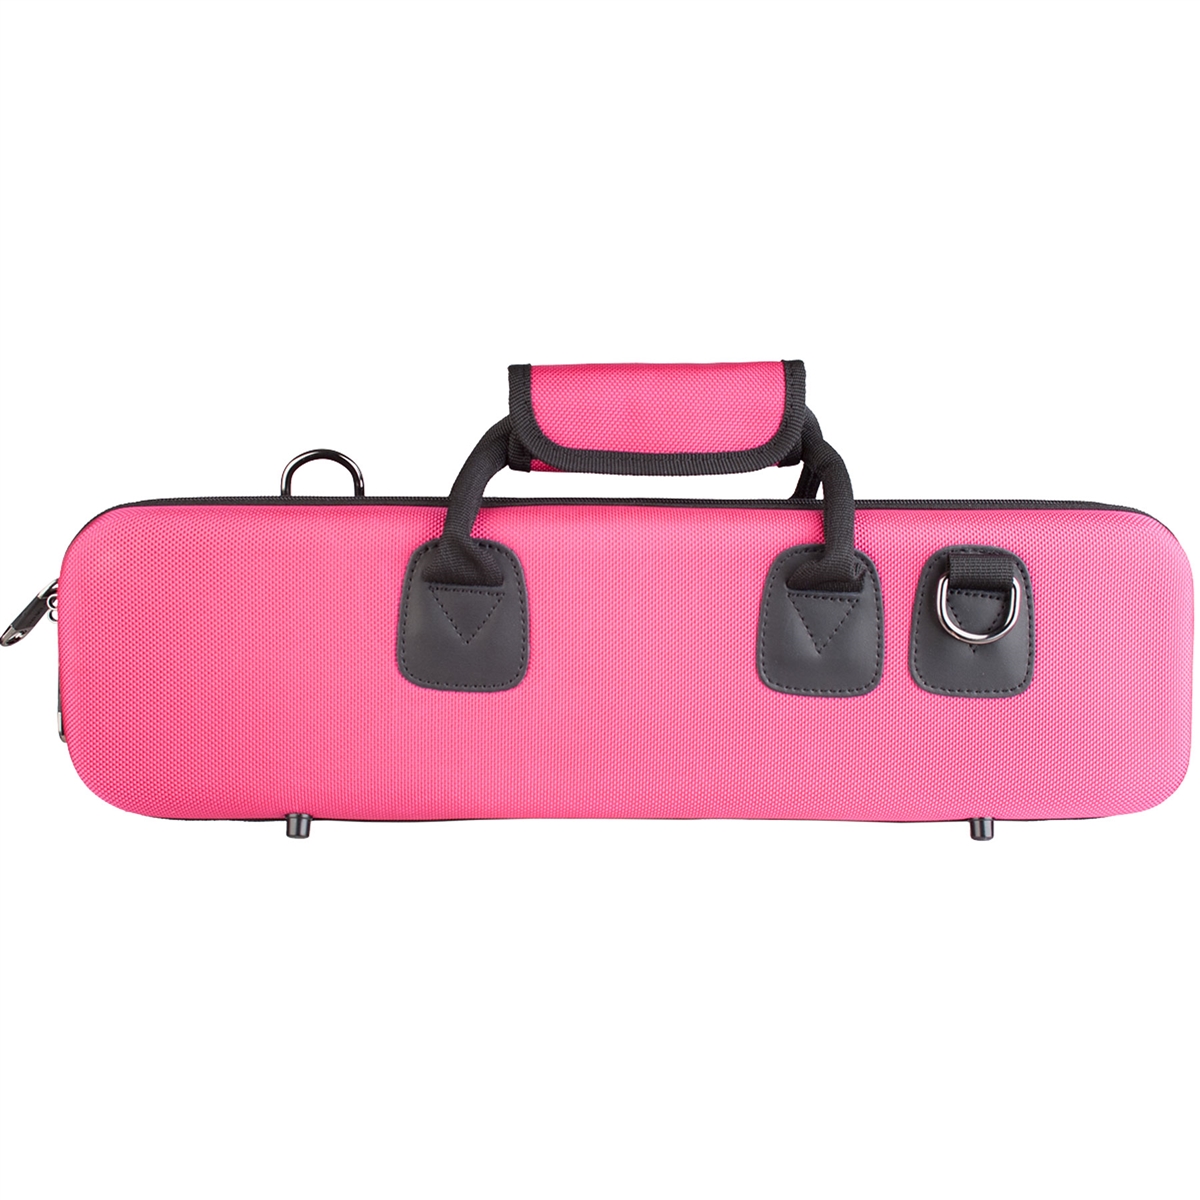 Protec PB308-HP Case for Flute - Hot Pink